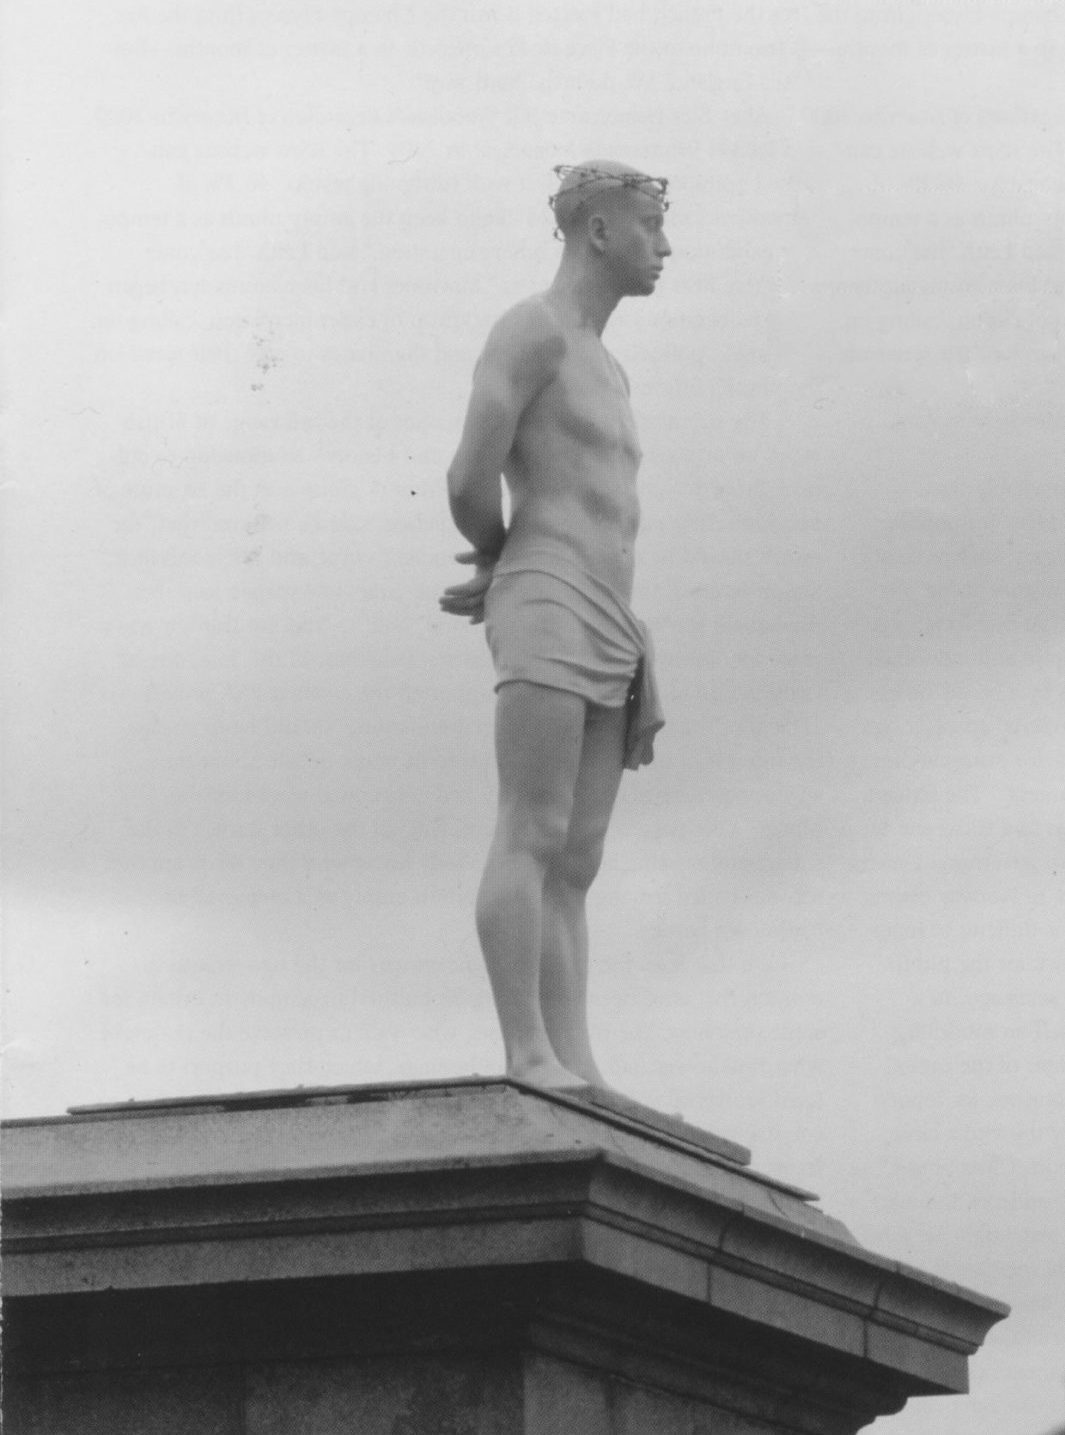 A lone sculpture of a single man painted white standing atop a large column and standing faced to the right. His hands are behind his back. The man wears only a white cloth around his pelvis, and a hair adornment. Behind him are clouded skies.